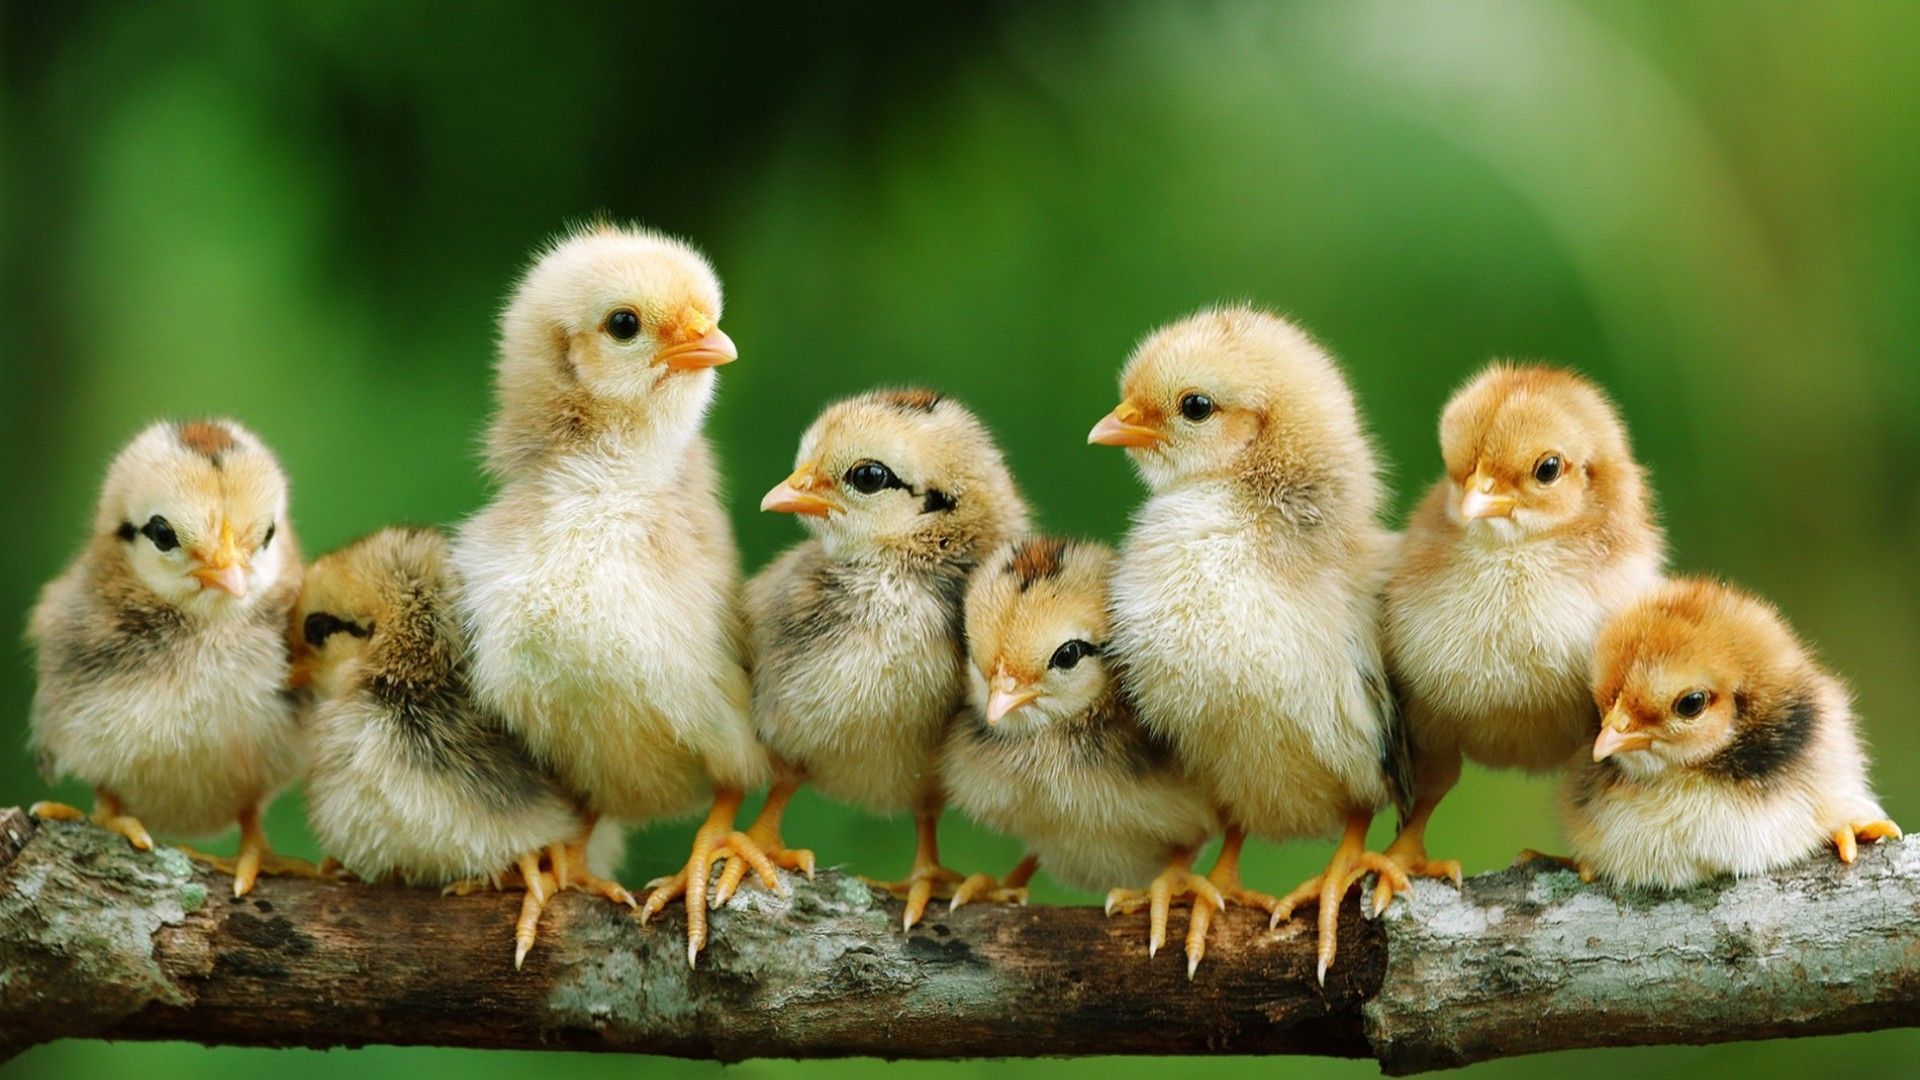 Free download Baby Chicks Wallpaper - [1920x1080] for your Desktop, Mobile & Tablet. Explore Chick Wallpaper. Easter Chick Wallpaper, Chick Wallpaper, Free Chick Wallpaper